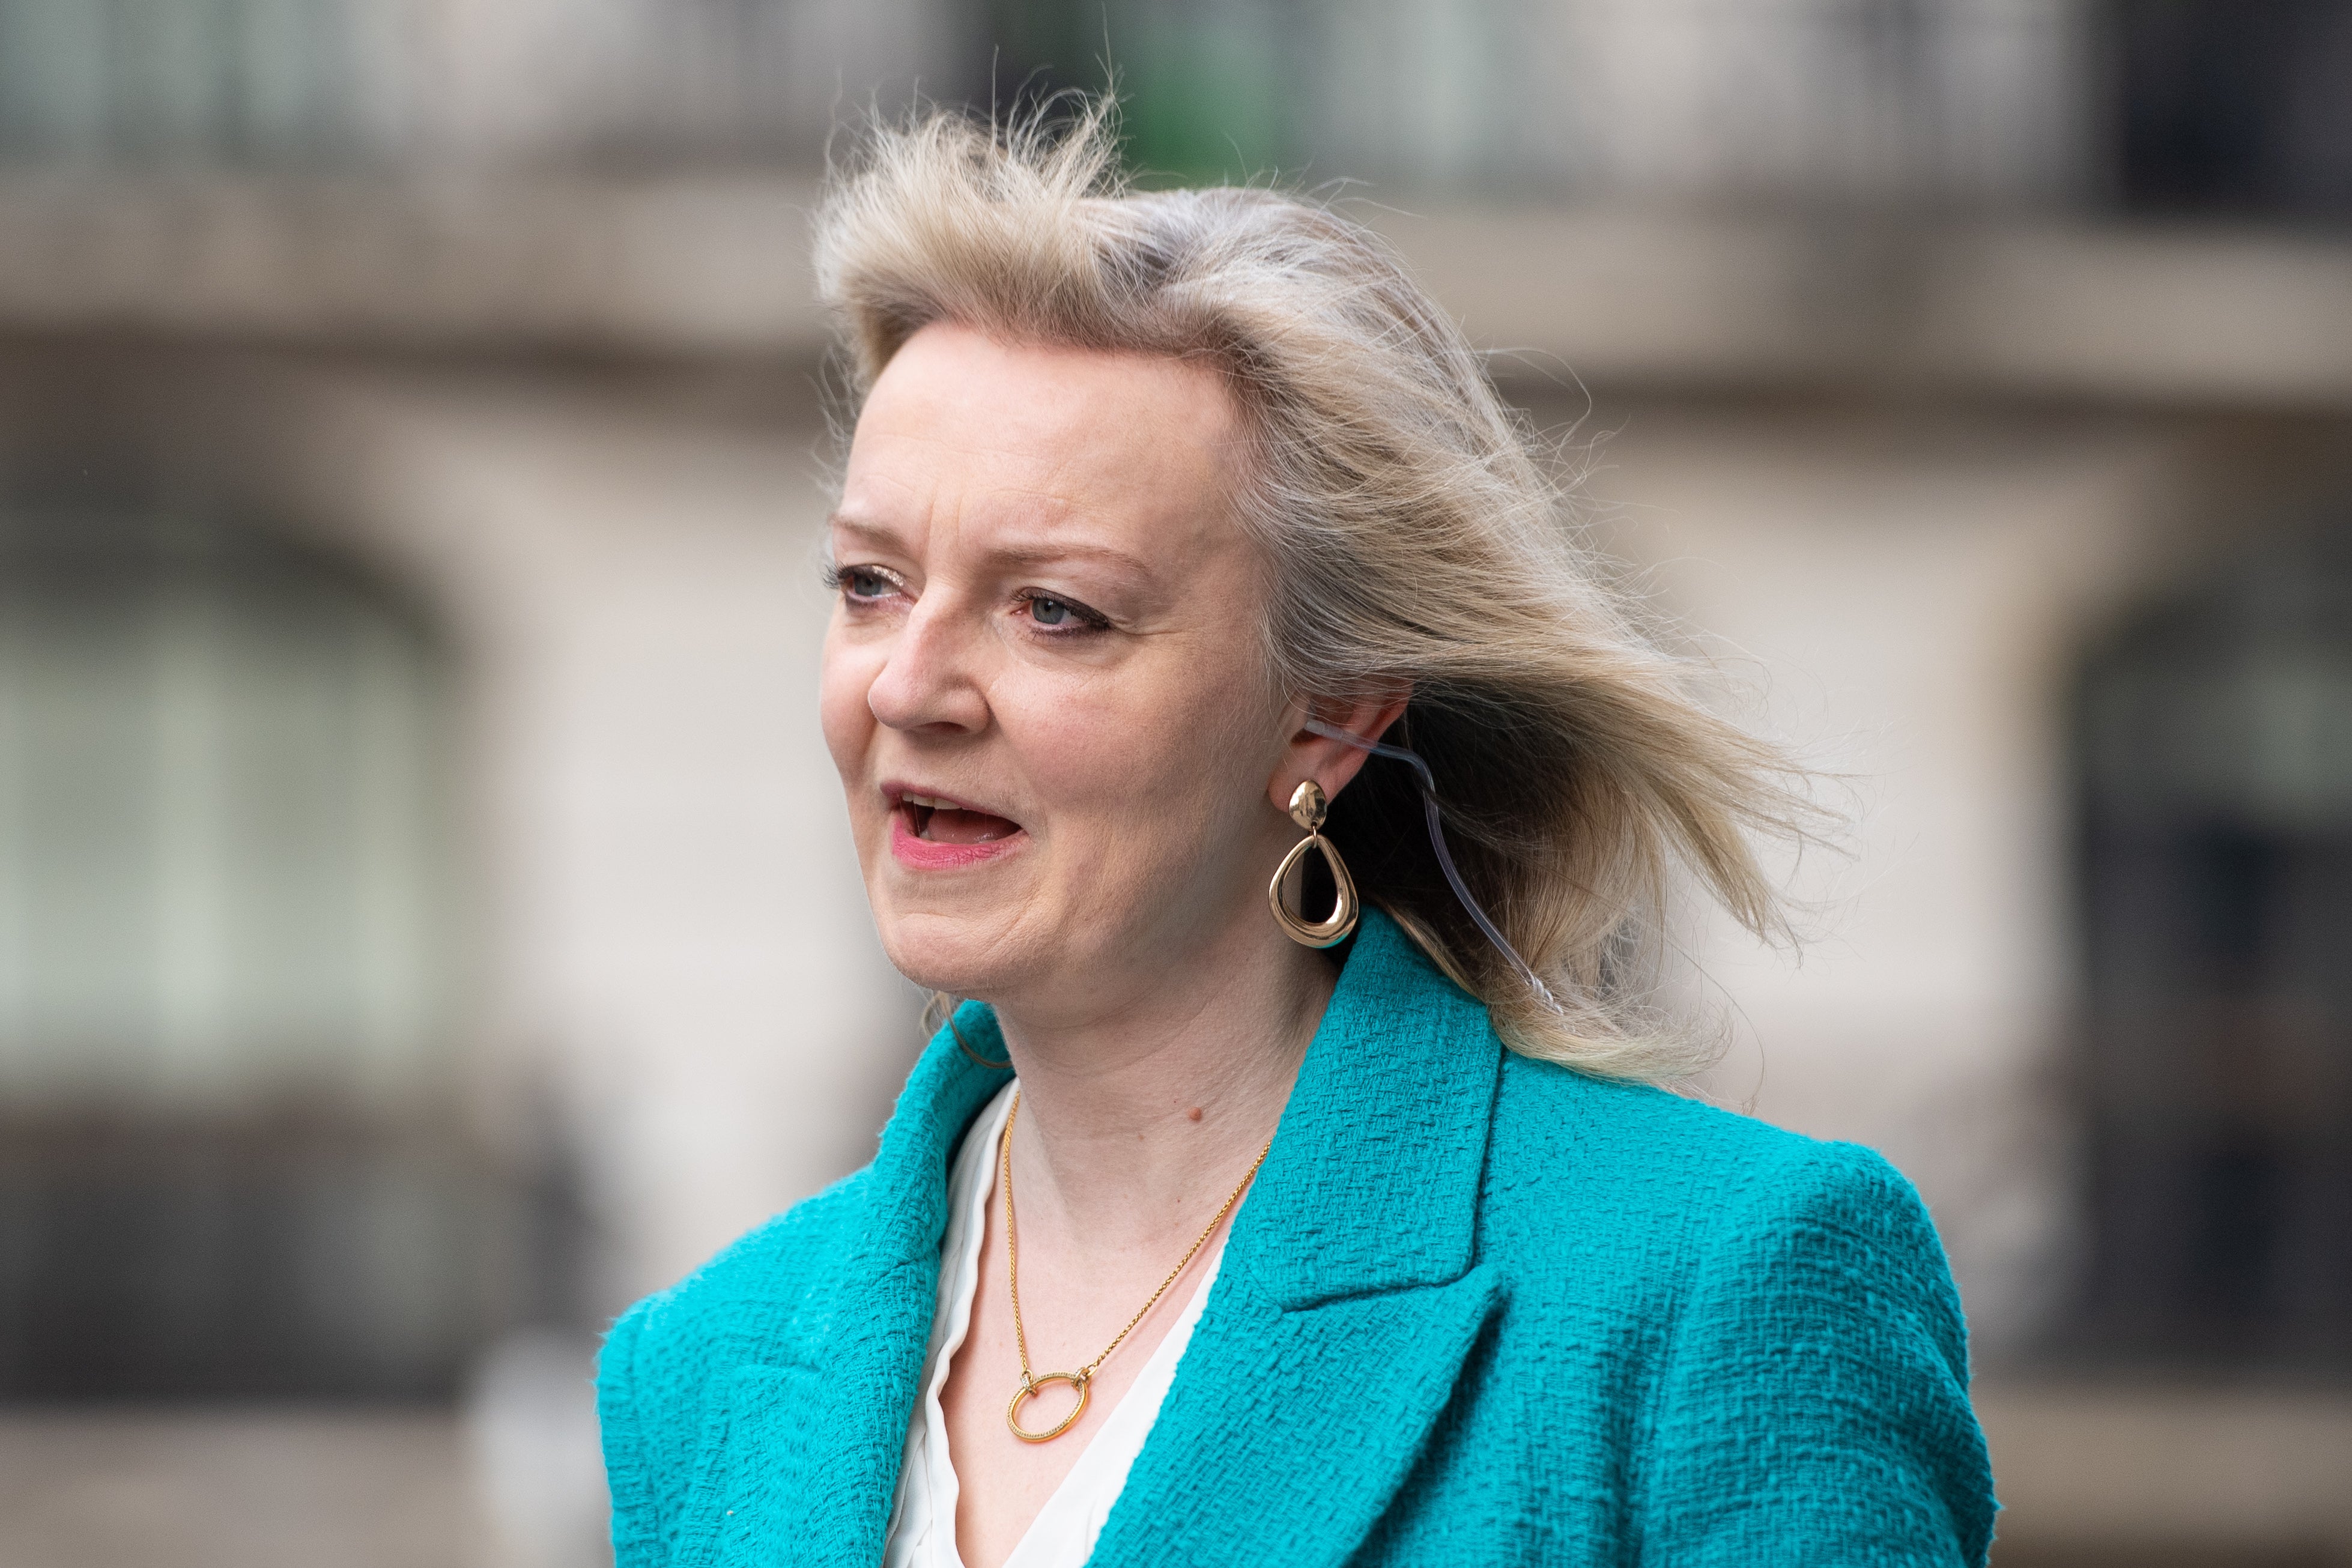 International trade secretary Liz Truss’s department is expected to secure an agreement as soon as next week with New Zealand